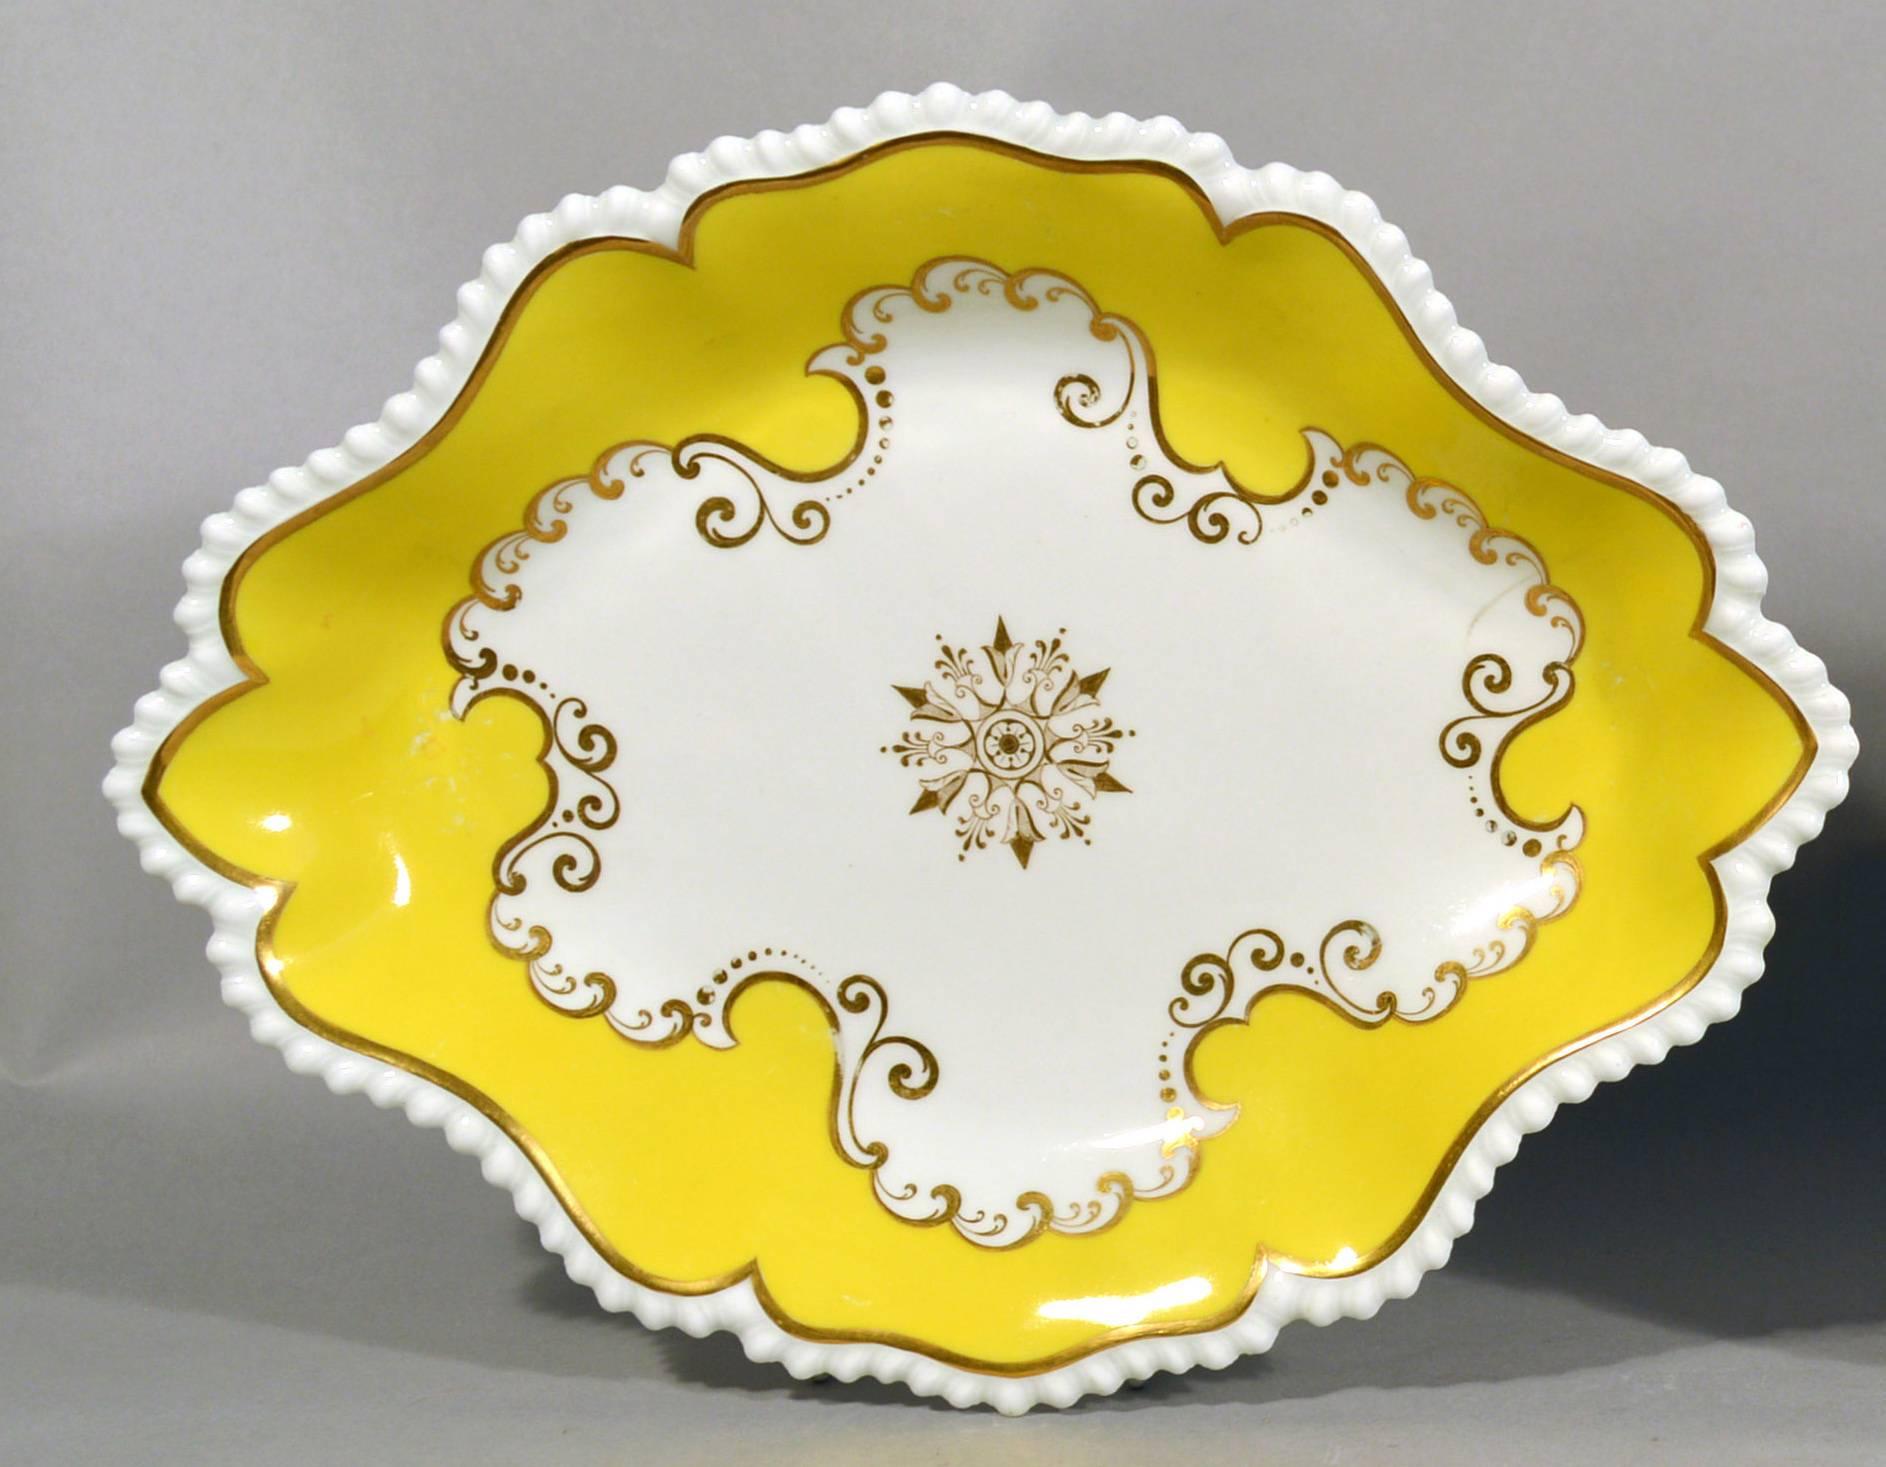 Regency Flight, Barr & Barr Worcester Yellow Oval Porcelain Dishes, circa 1820